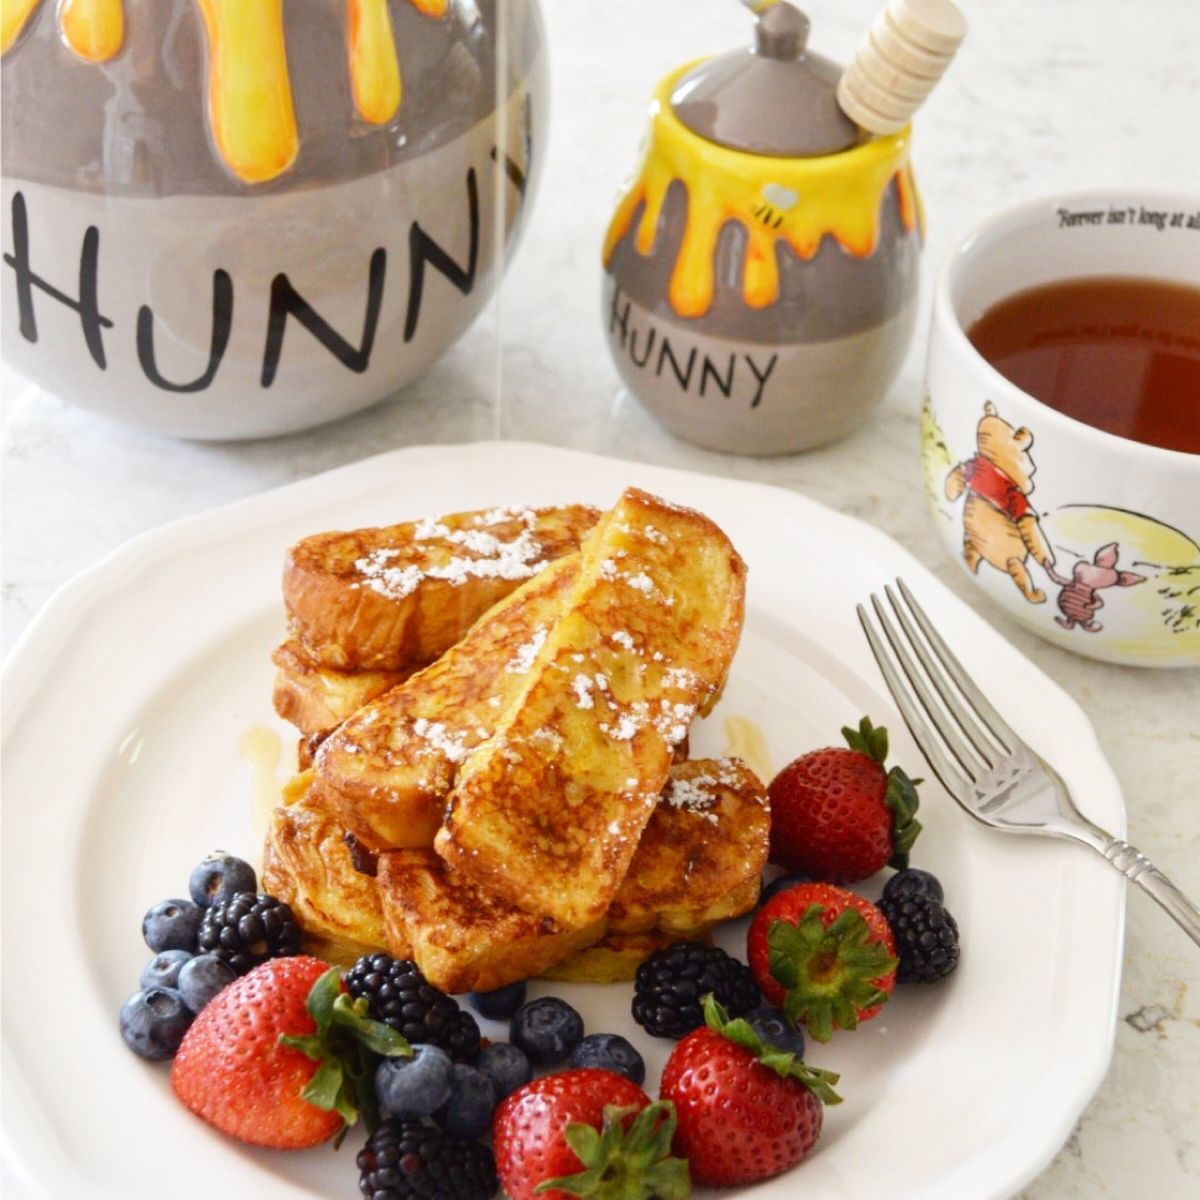 These vanilla honey french toast sticks are made with brioche bread that is dipped inside a sweet vanilla custard.  